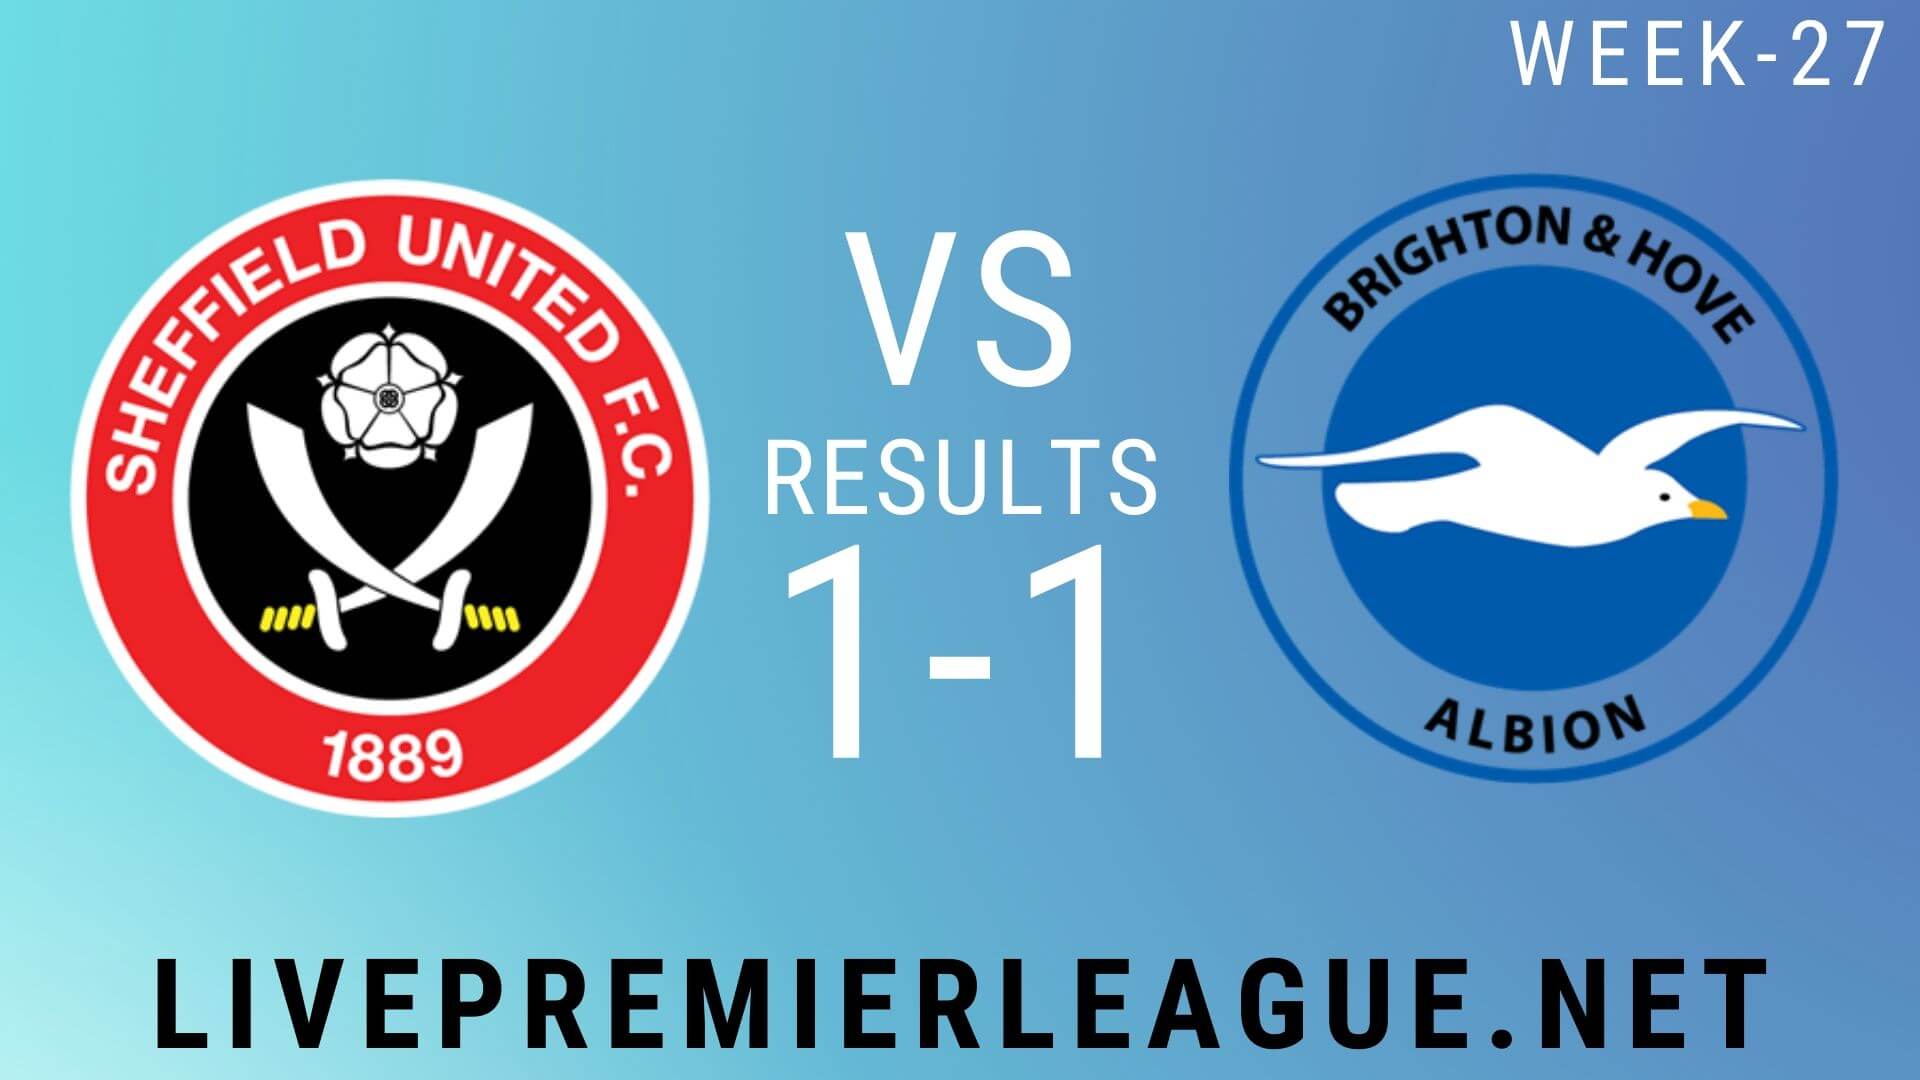 Sheffield United Vs Brighton and Hove Albion | Week 27 Result 2020